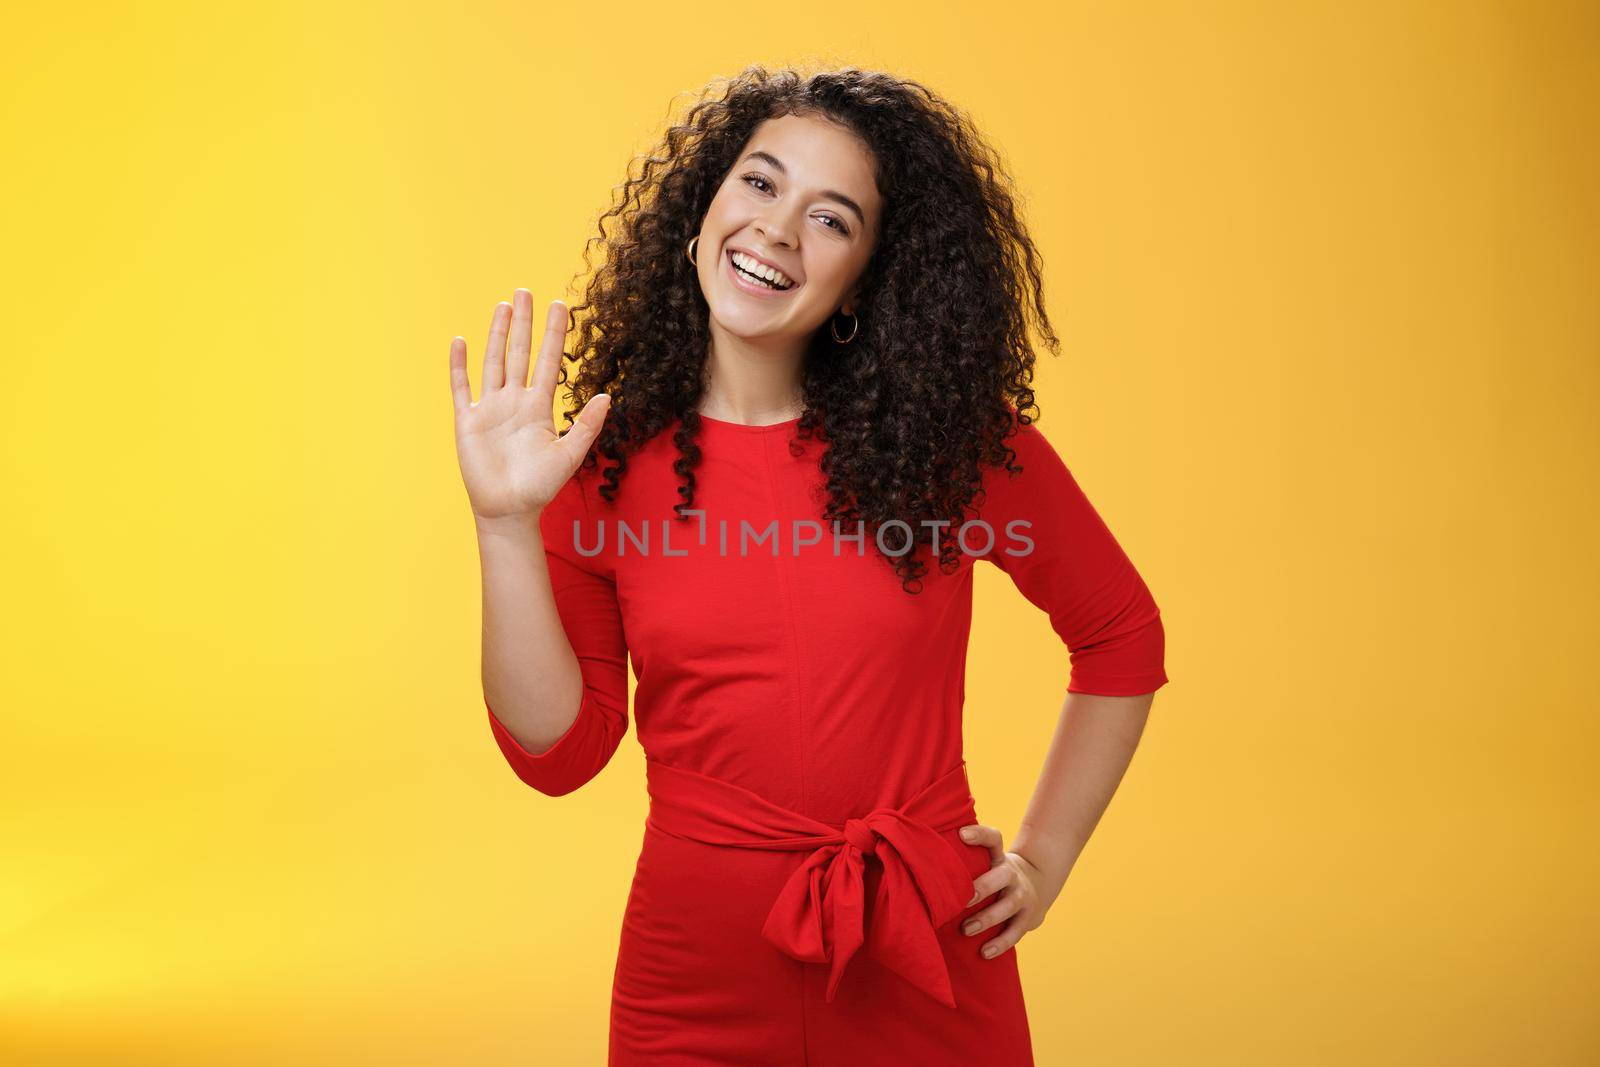 Hey my name is. Friendly-looking self-assured carefree cute 25s woman with curly hair waving with raised palm in hello or hi gesture smiling broadly greeting new coworkers over yellow background.